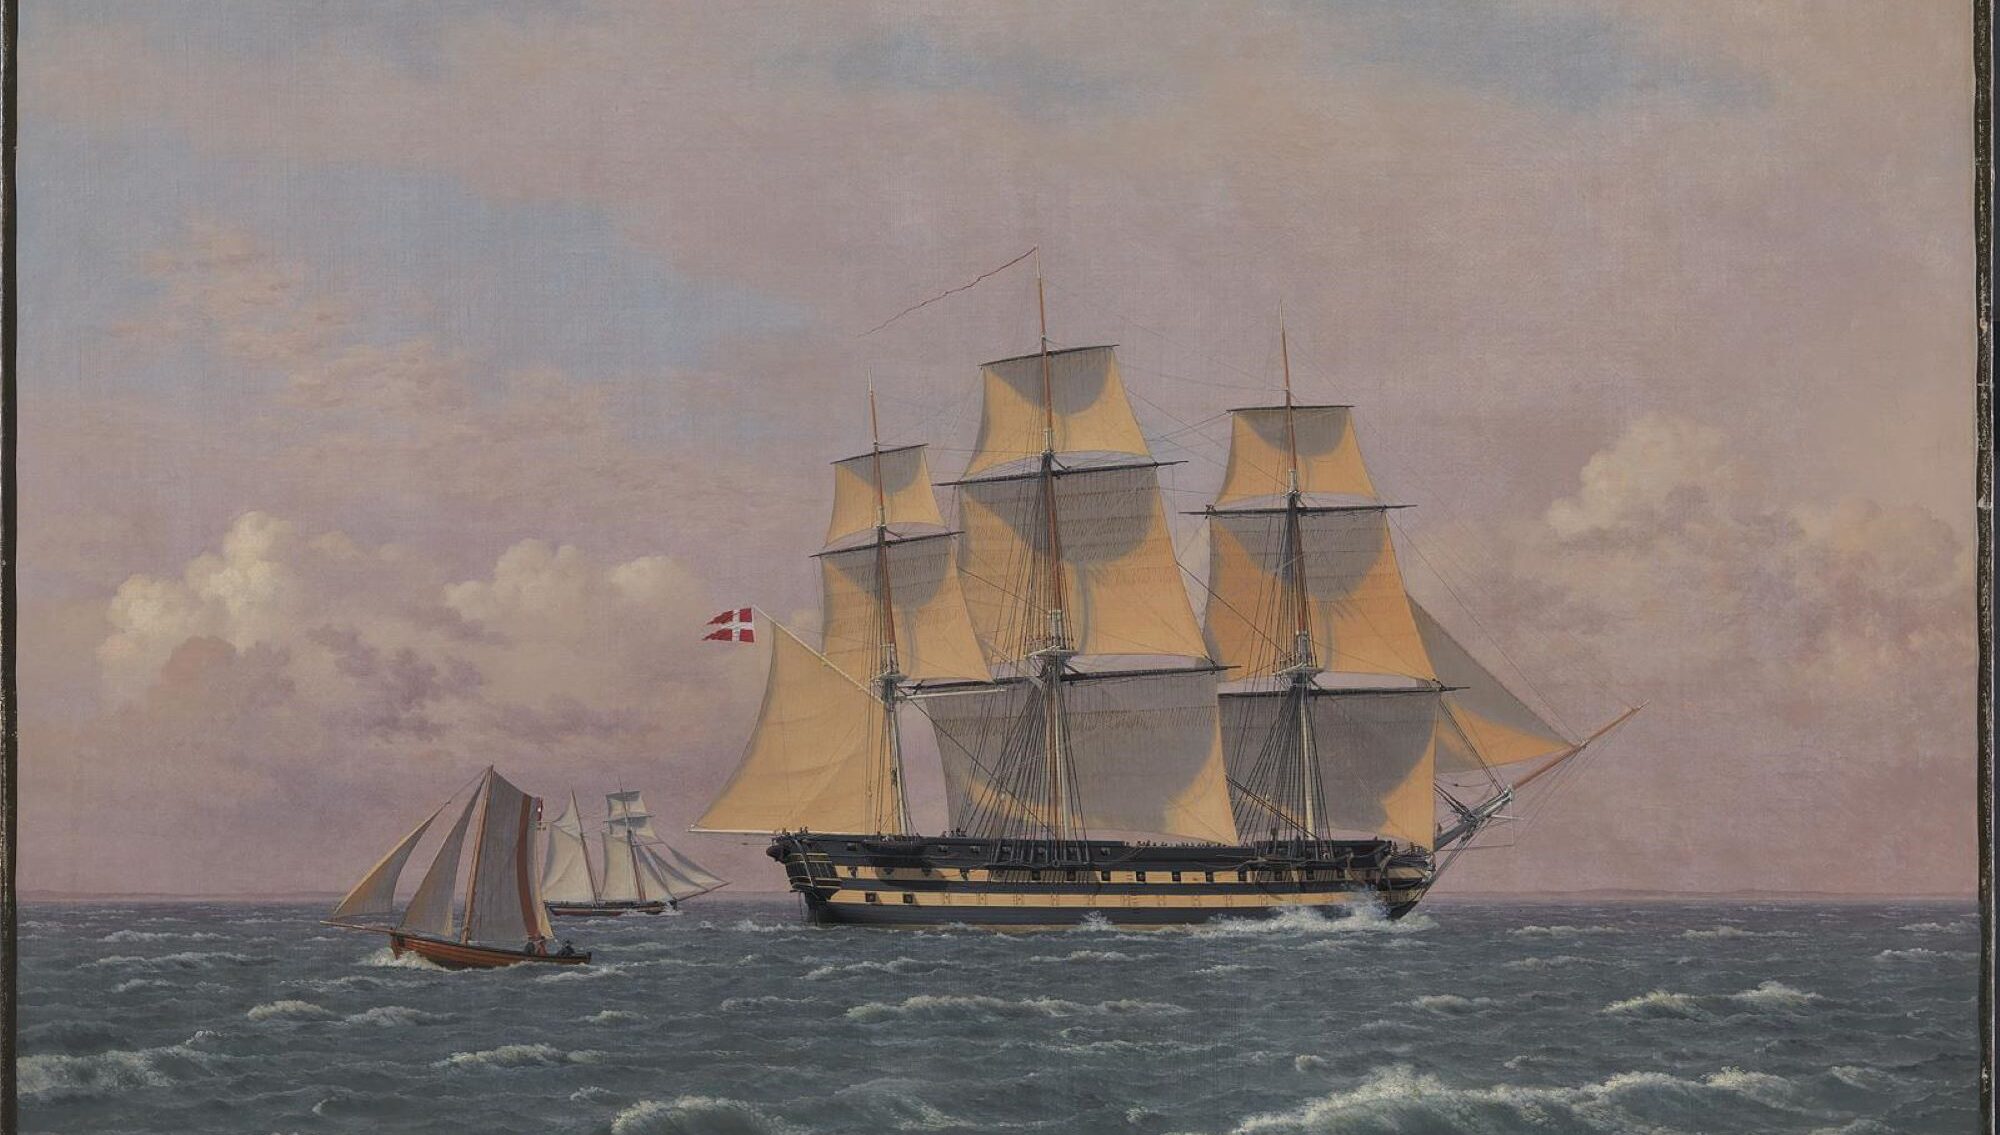 C.W. Eckersberg's painting "The 84-Gun Danish Warship Dronning Marie in the Sound” contains beer byproducts in its canvas primer. 